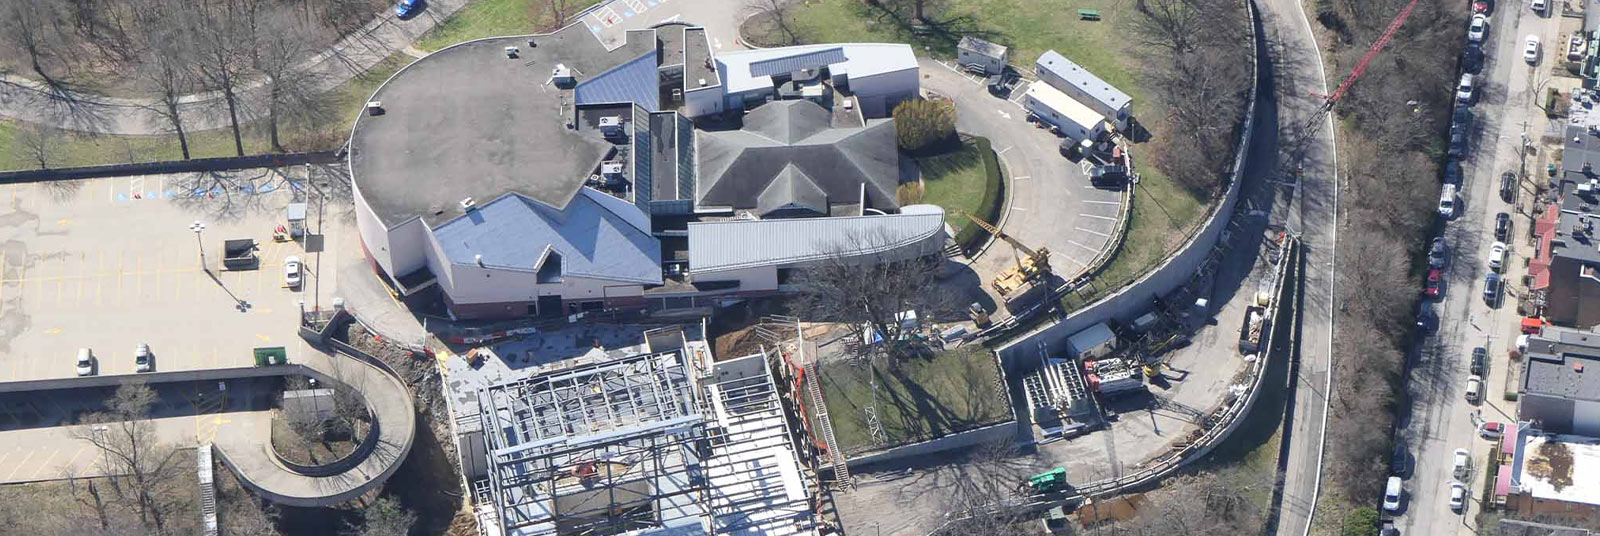 Aerial shot of the construction progress at the new Playhouse in the Park in Eden Park in Cincinnati, Ohio.